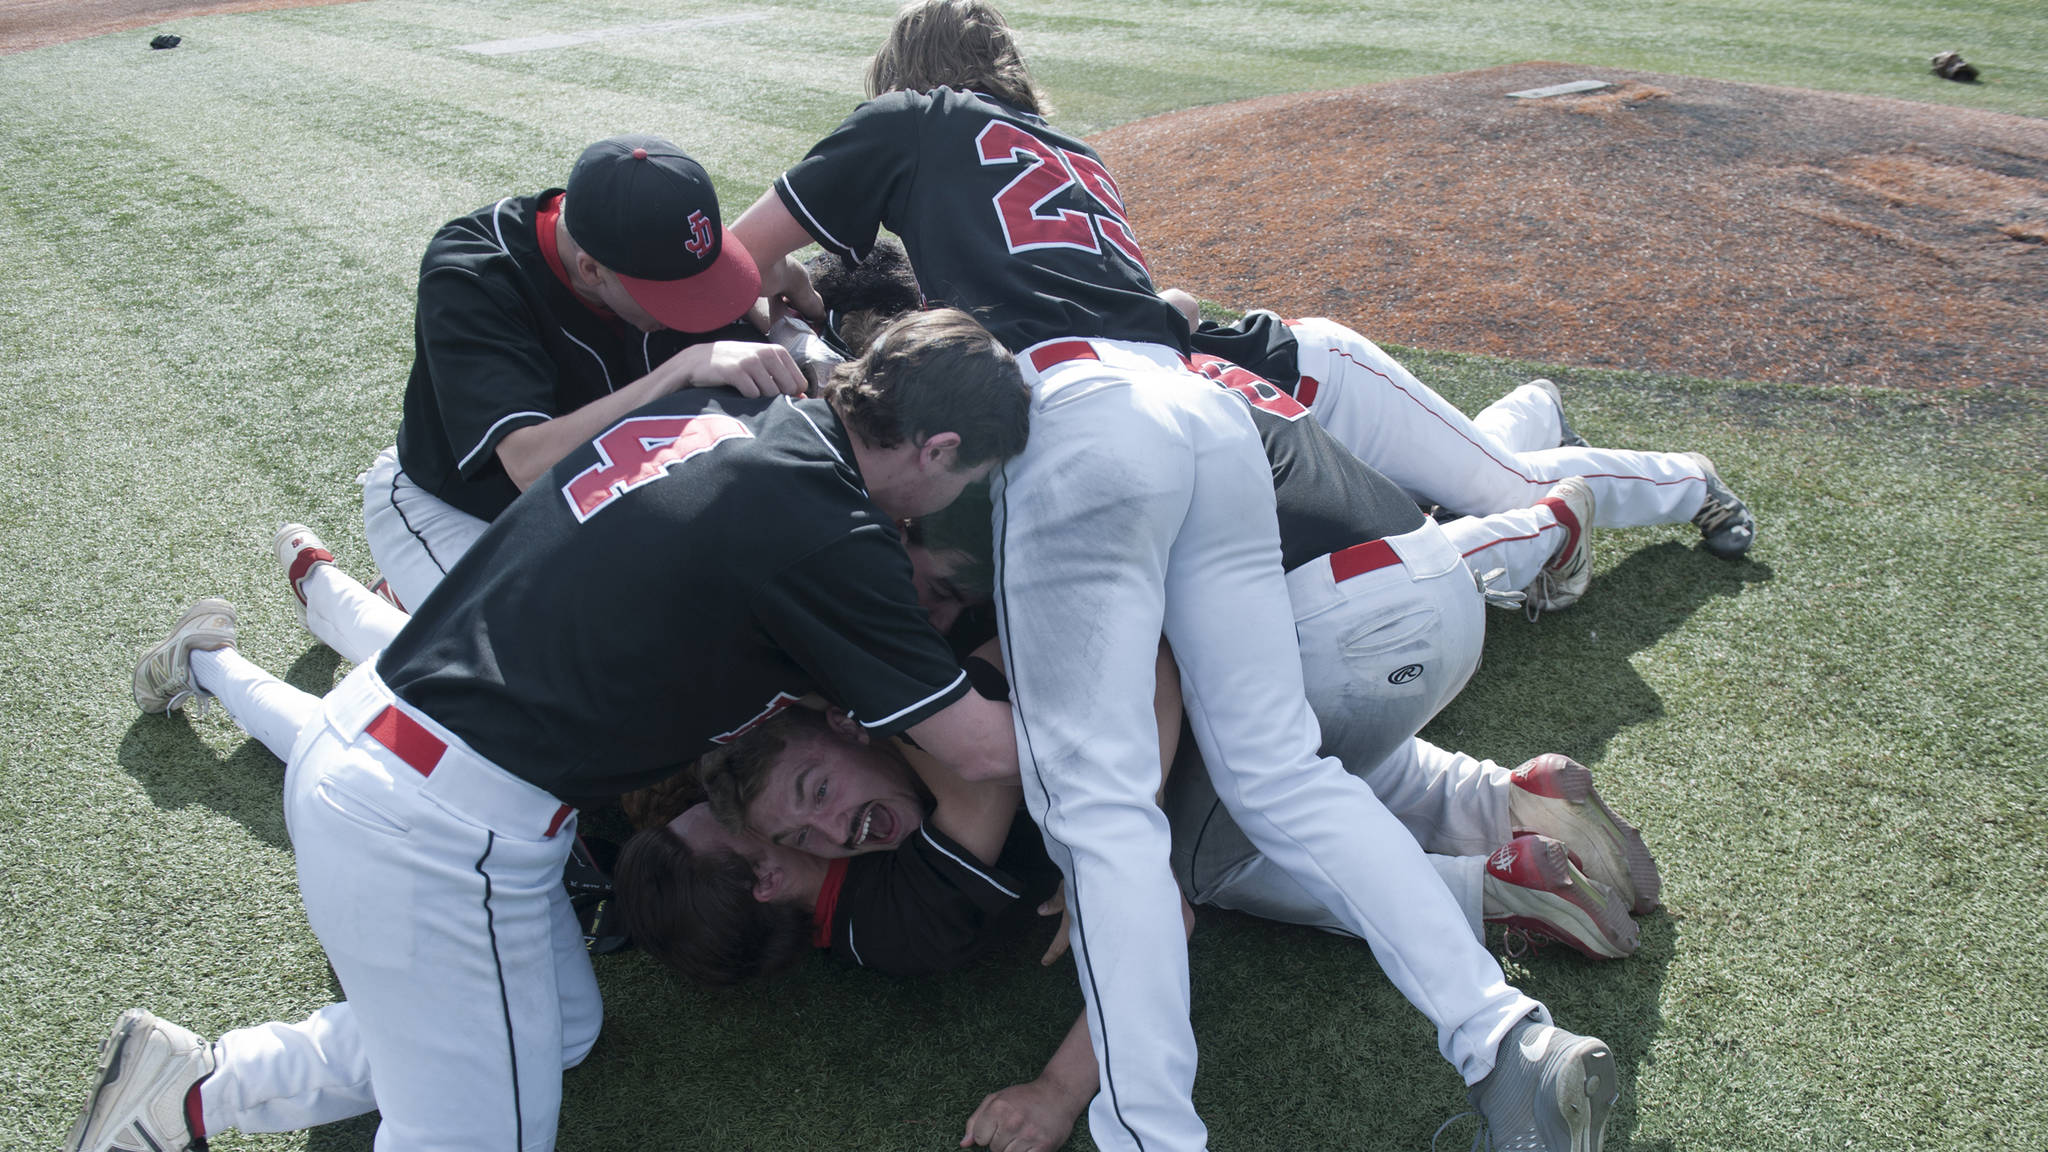 A pig pile for Juneau-Douglas High School pitcher Kasey Watts. The Crimson Bears won the ASAA state baseball championships over South Anchorage 3-2 on Saturday. (Michael Dinneen | For the Juneau Empire)